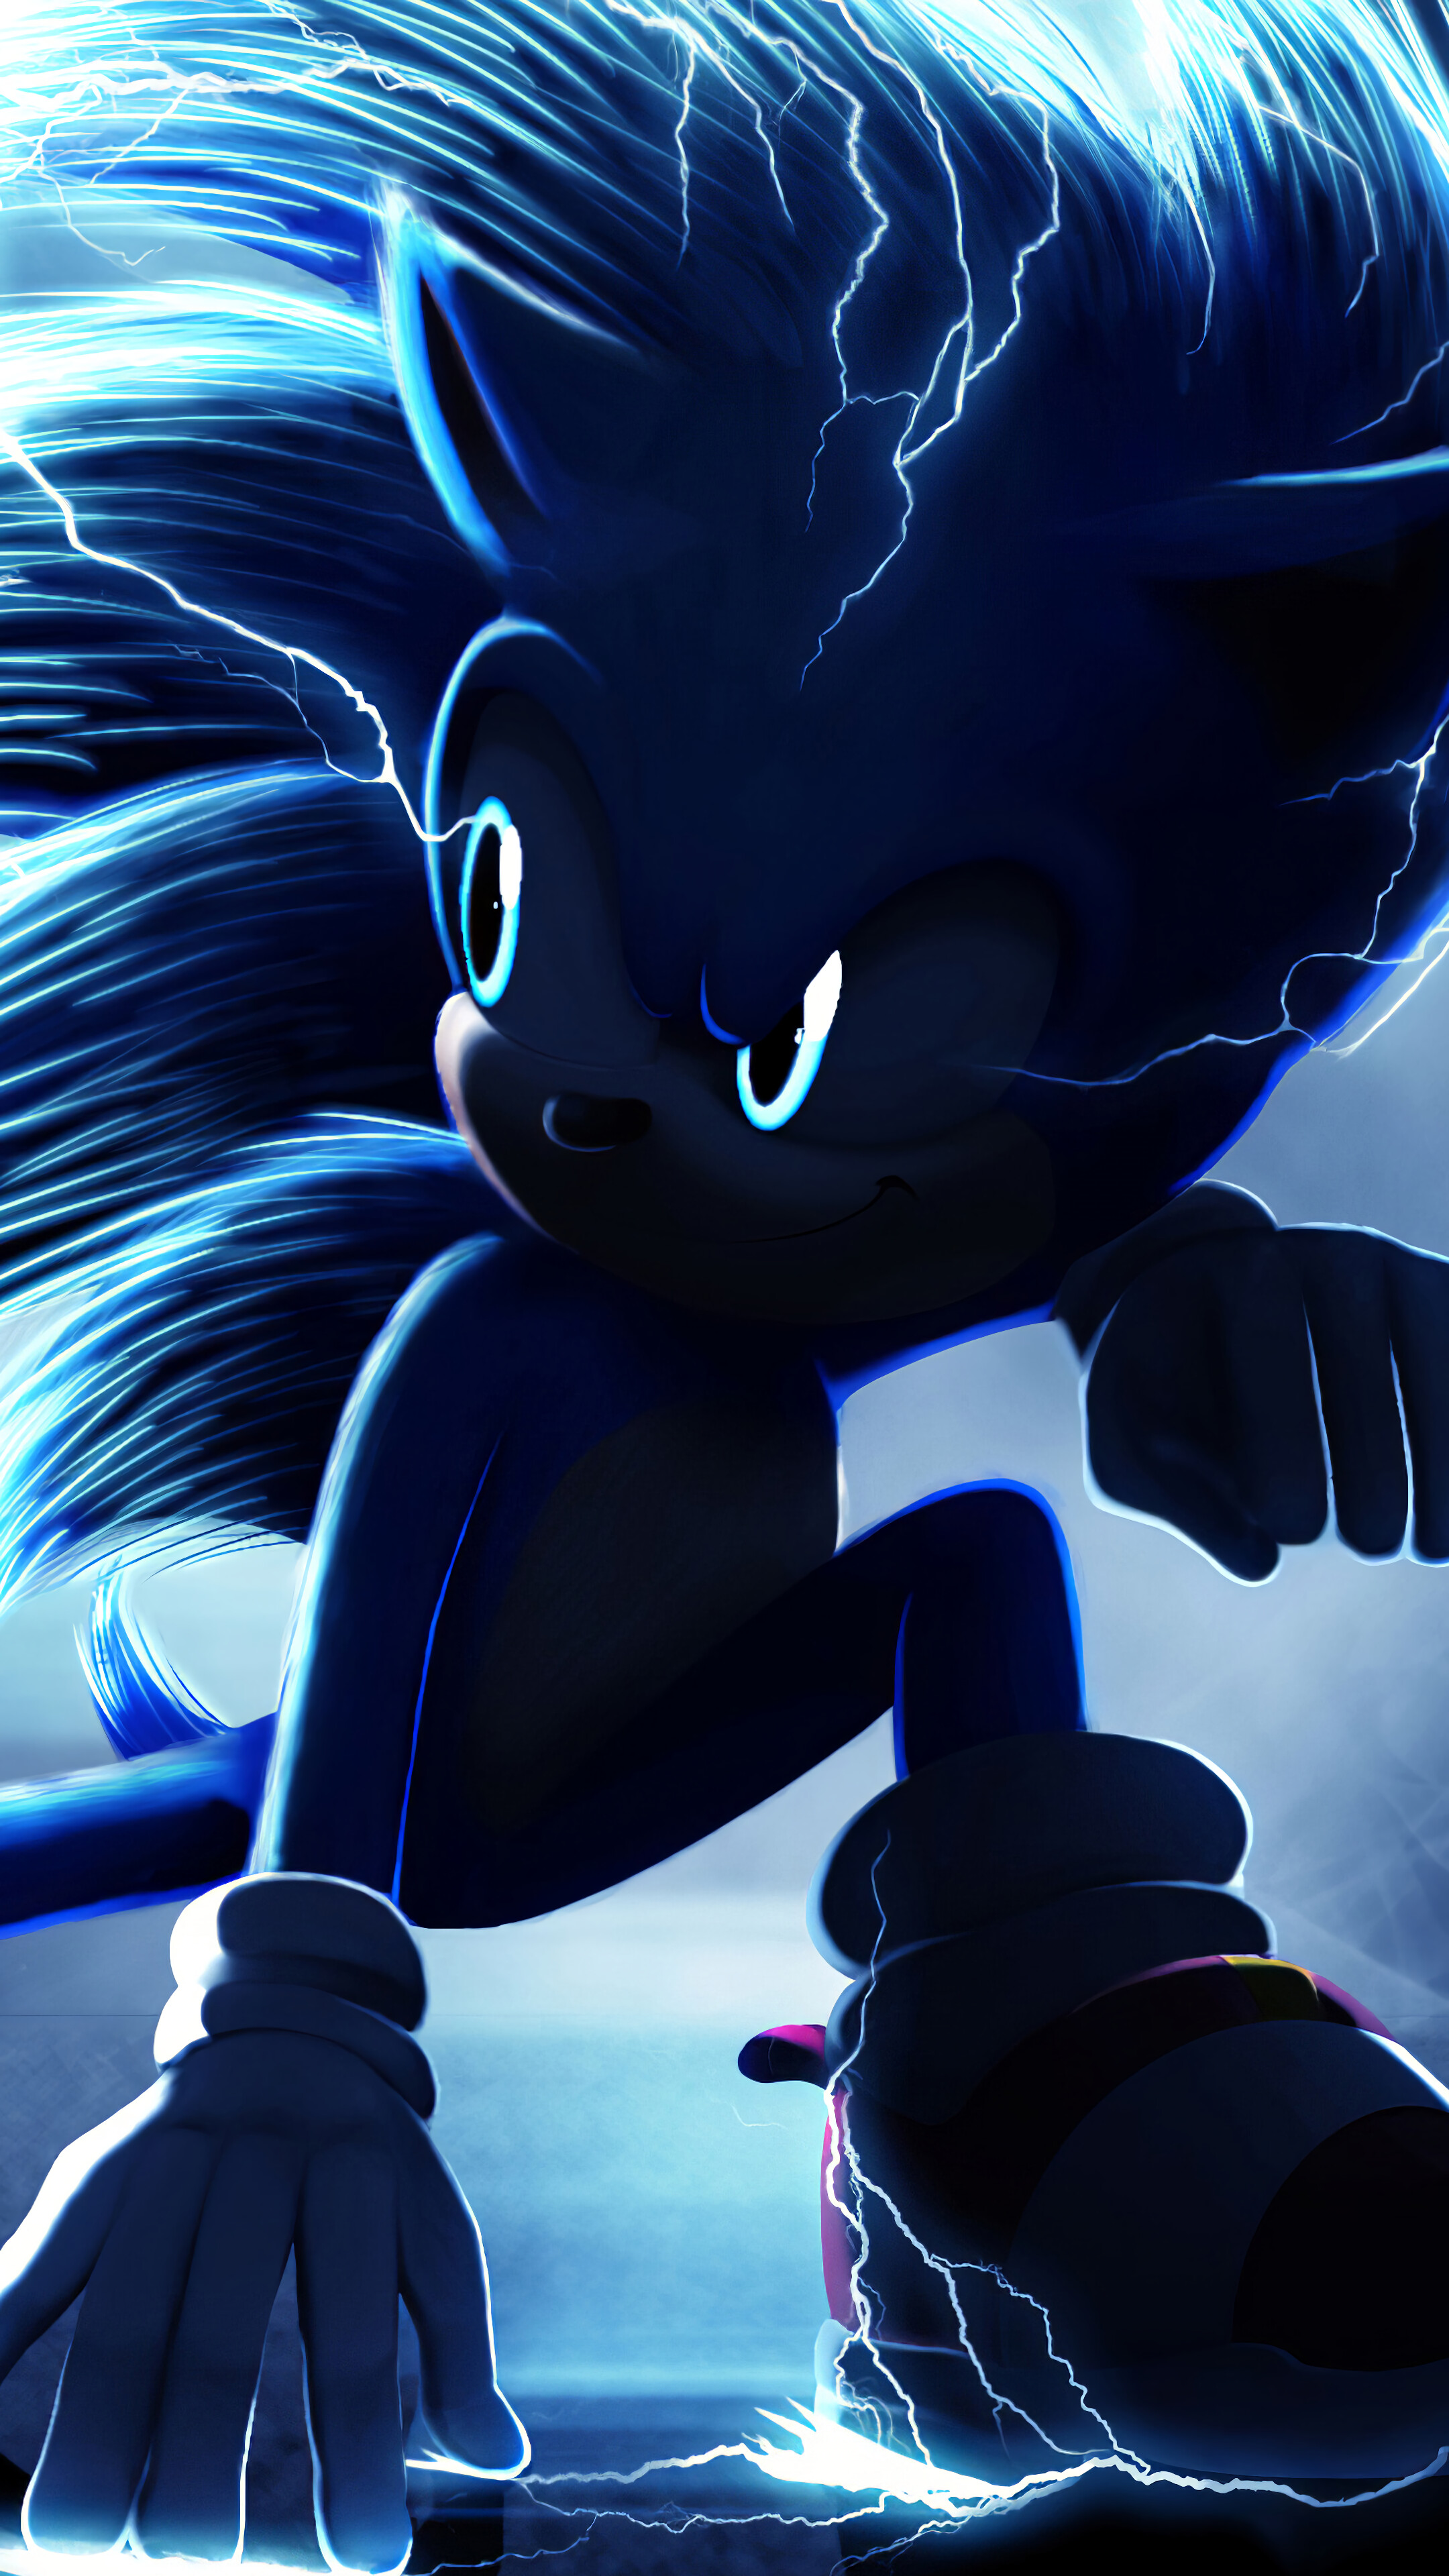 Blue 4K HD Sonic the Hedgehog Wallpapers  HD Wallpapers  ID 98696